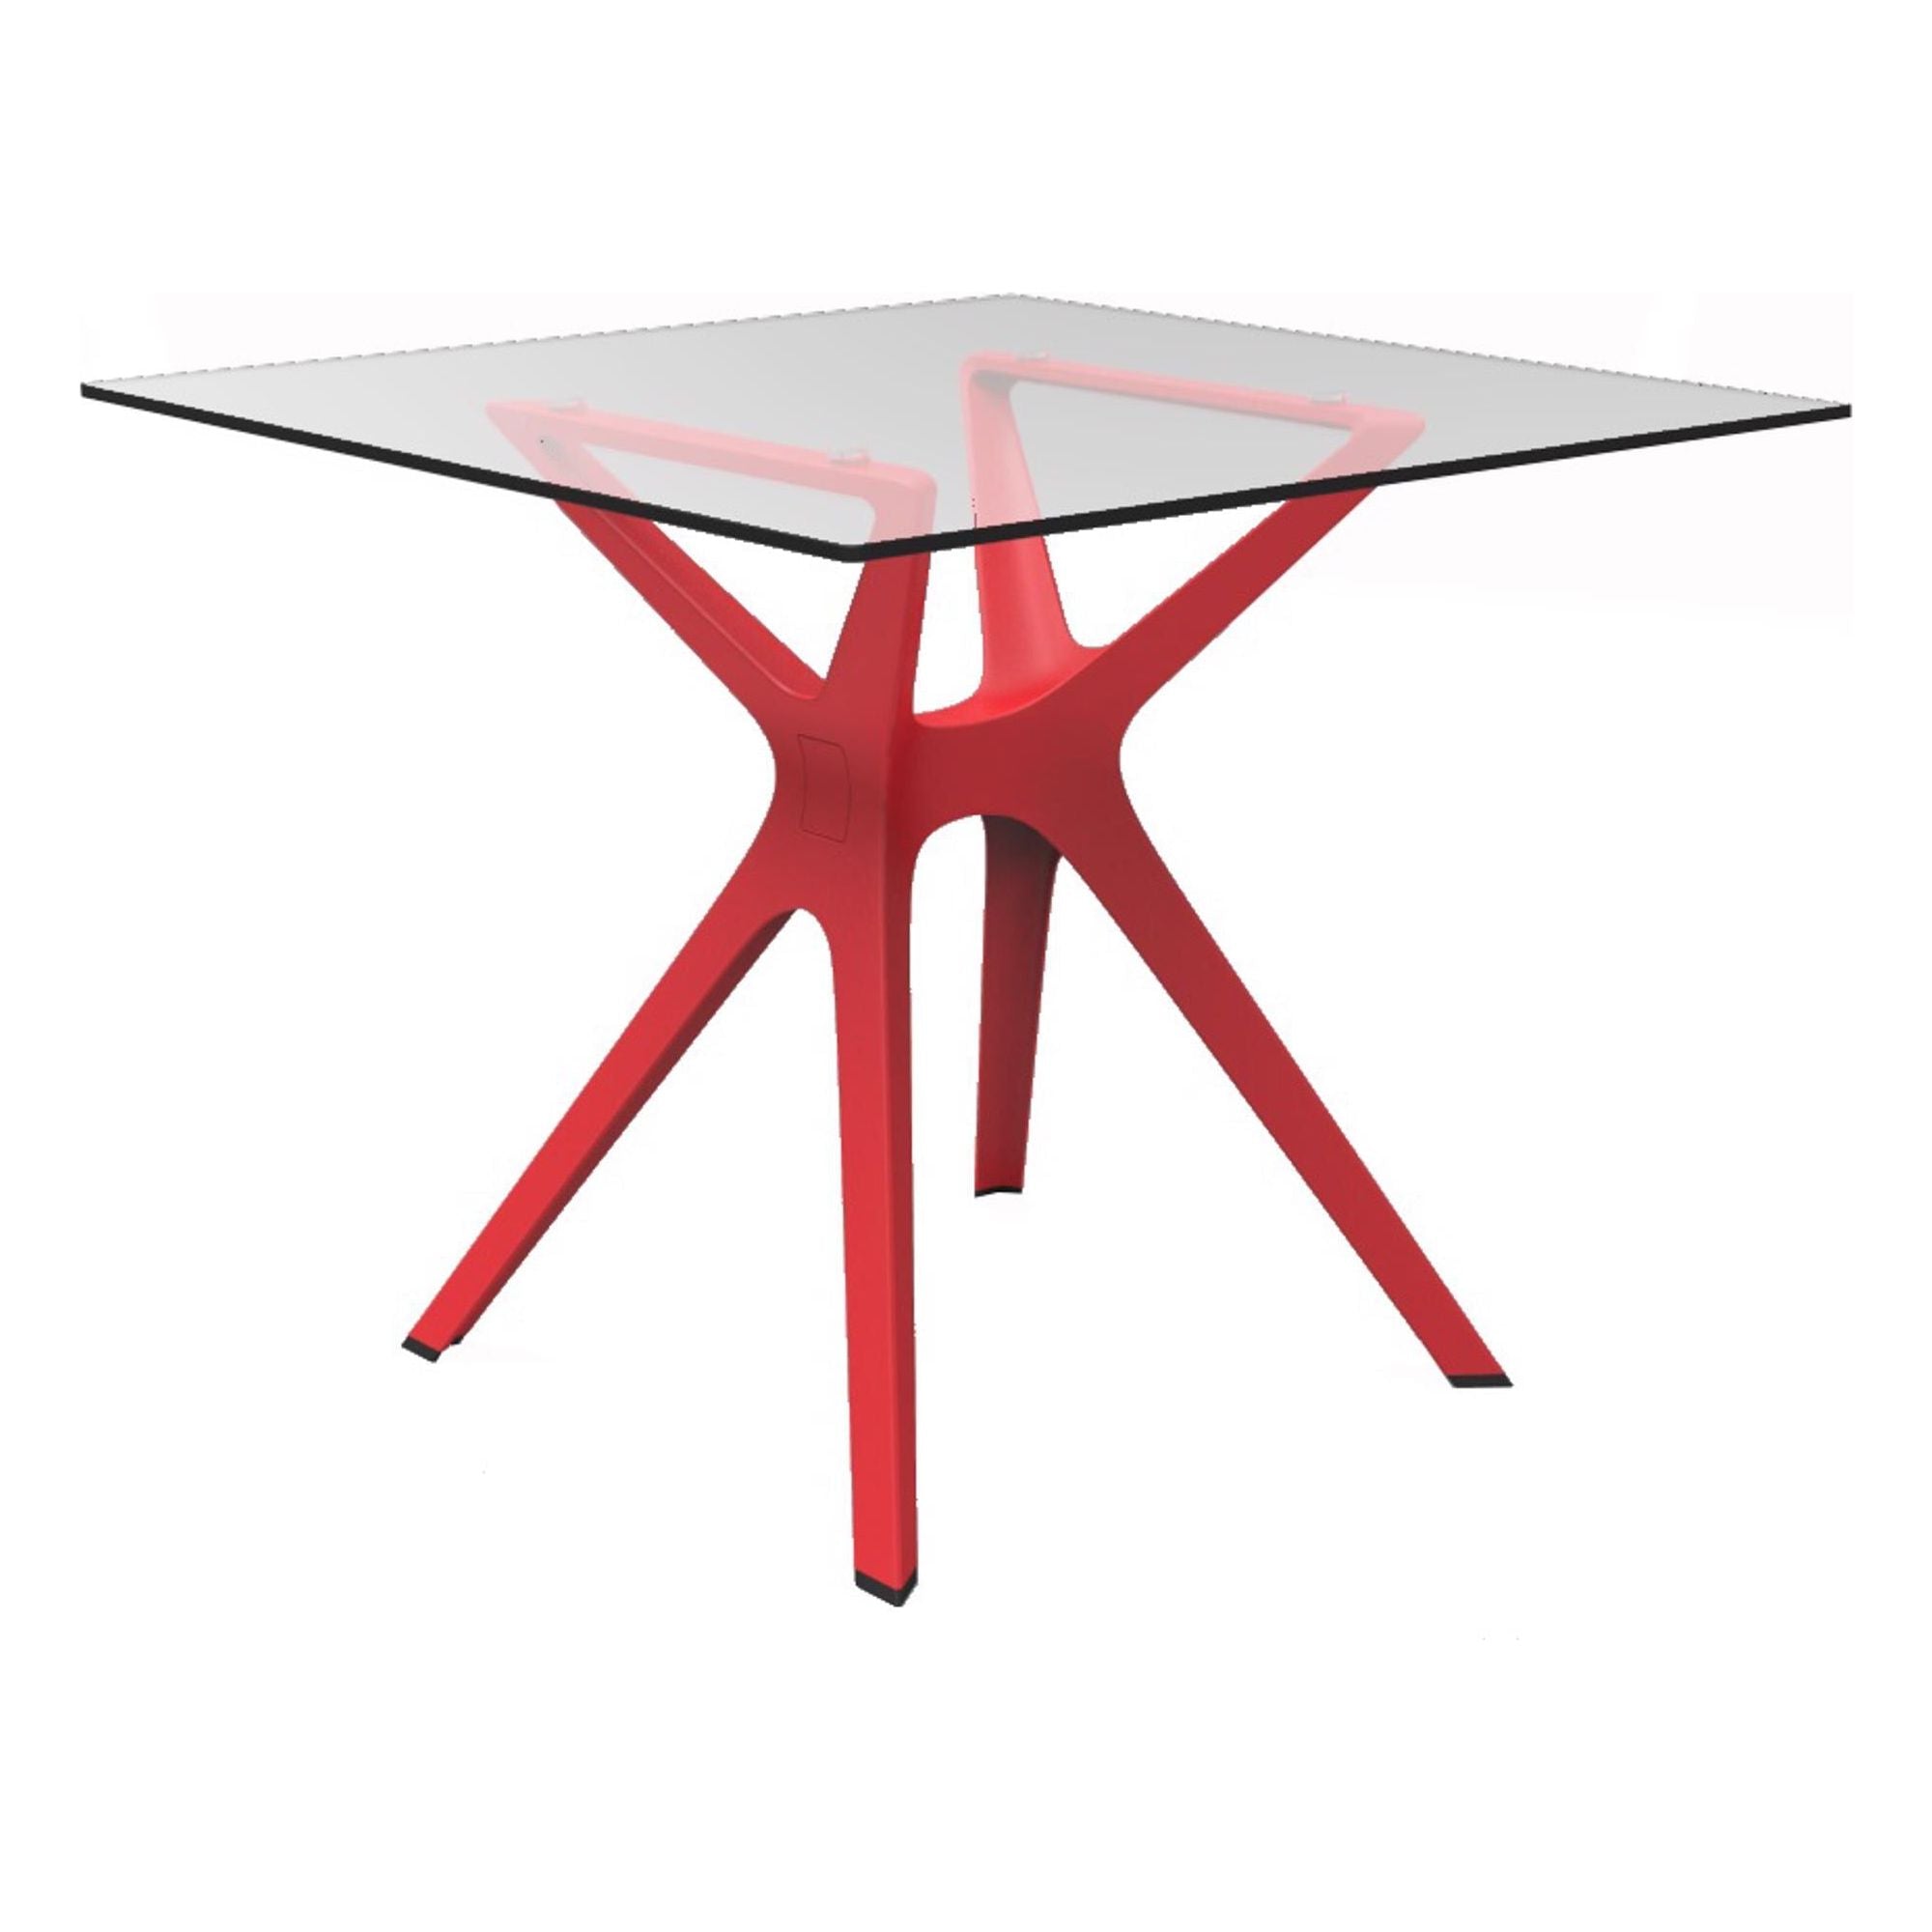 Resol Vela s square table indoors, outdoor 90x90 red base